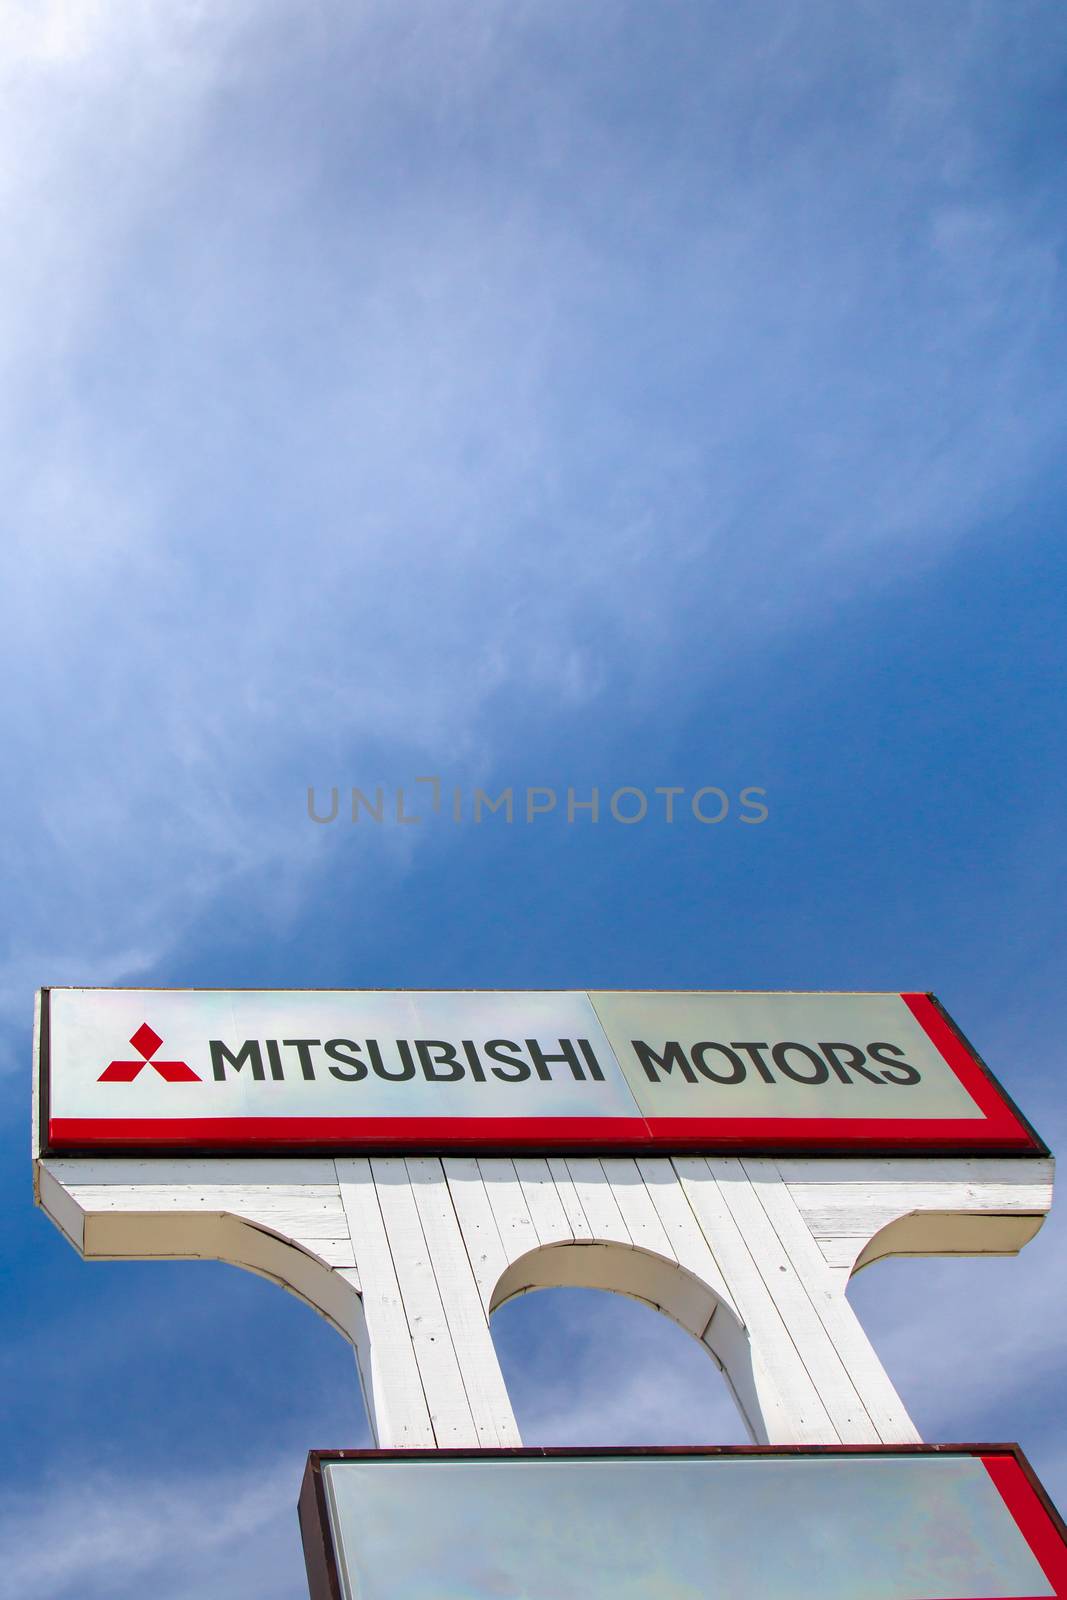 Mitsubishi Motors  Vertical Autombile Dealership Sign by wolterk